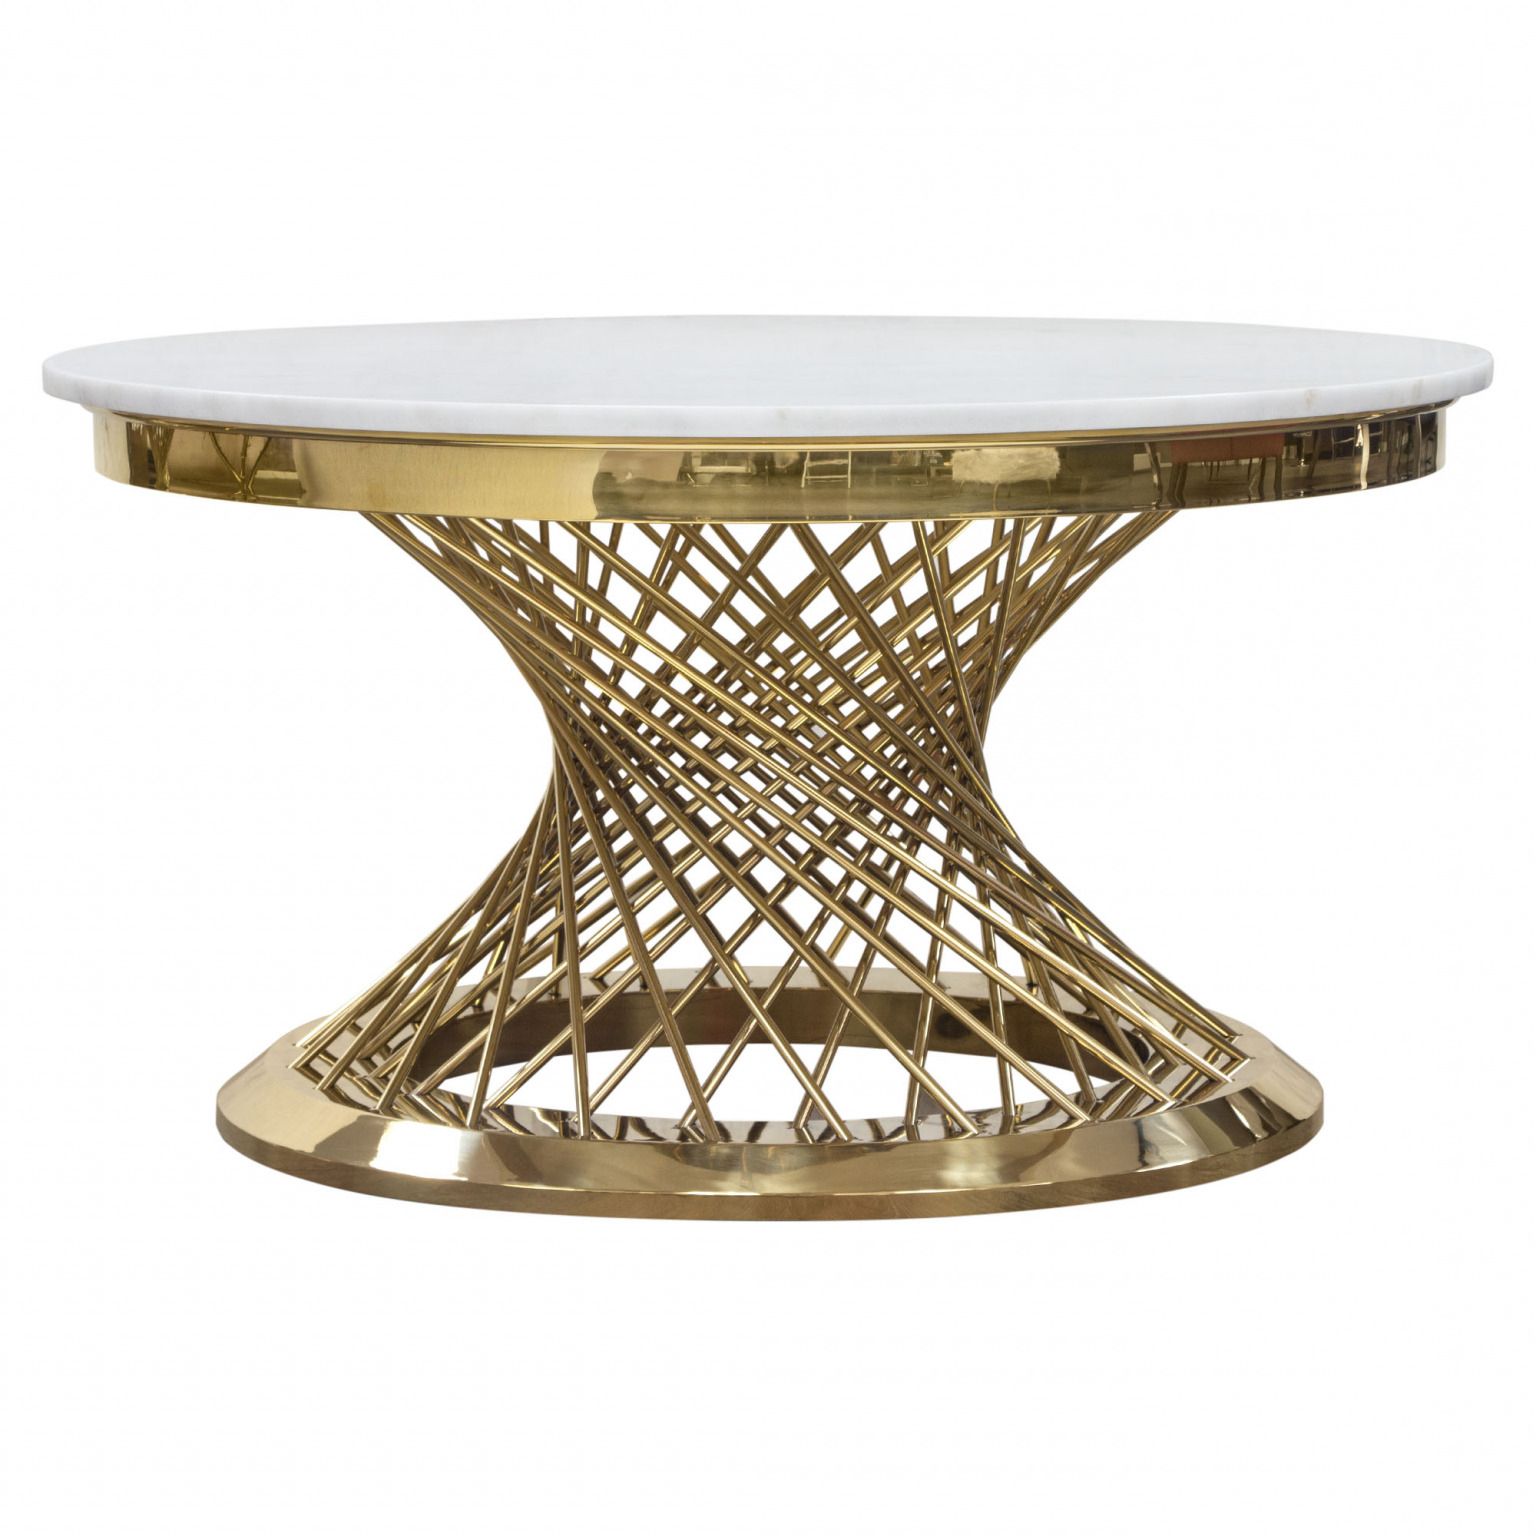 Solstice 35" Round Cocktail Table With Genuine Marble Top Within Most Popular Polished Chrome Round Cocktail Tables (Gallery 4 of 20)